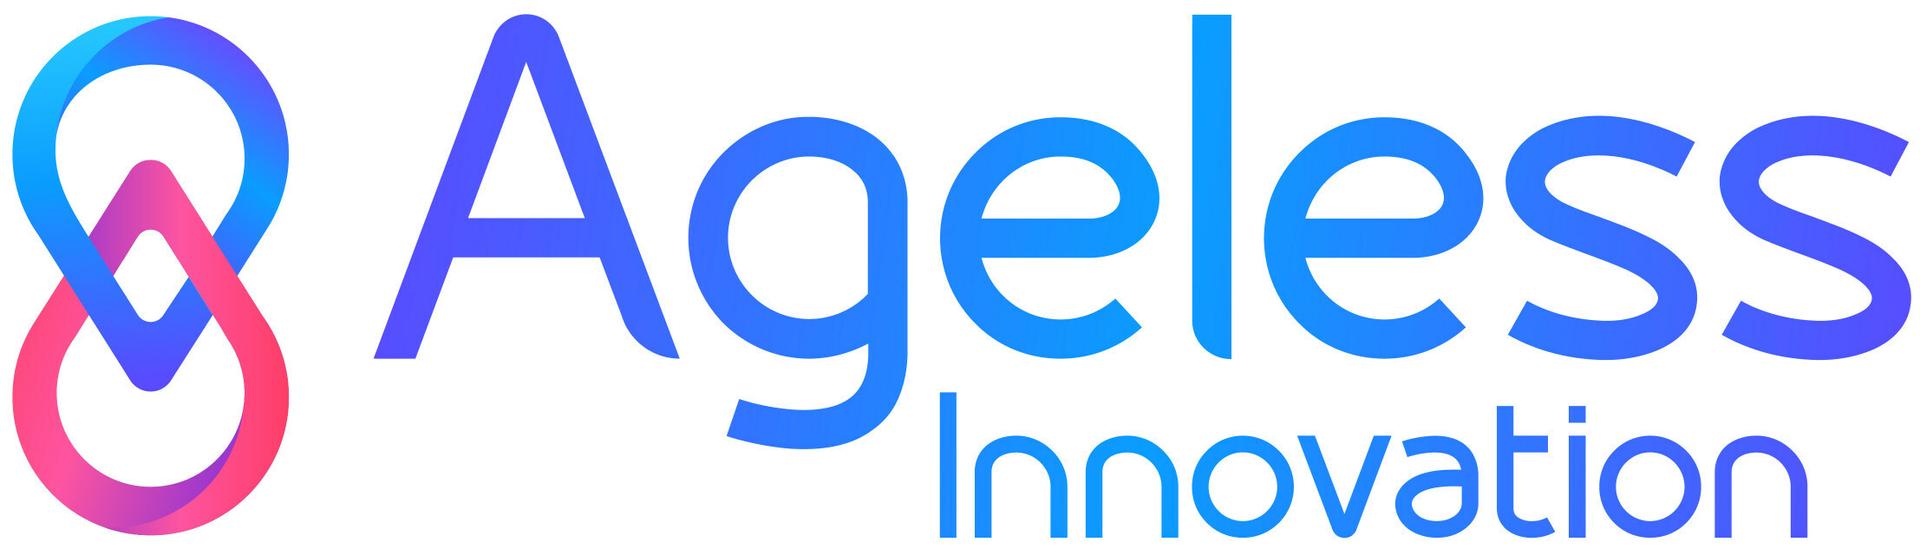 Ageless Innovation Names Chief Marketing Officer, Appoints New Hires to Mark Milestone Year and Expand Team of Aging Experts